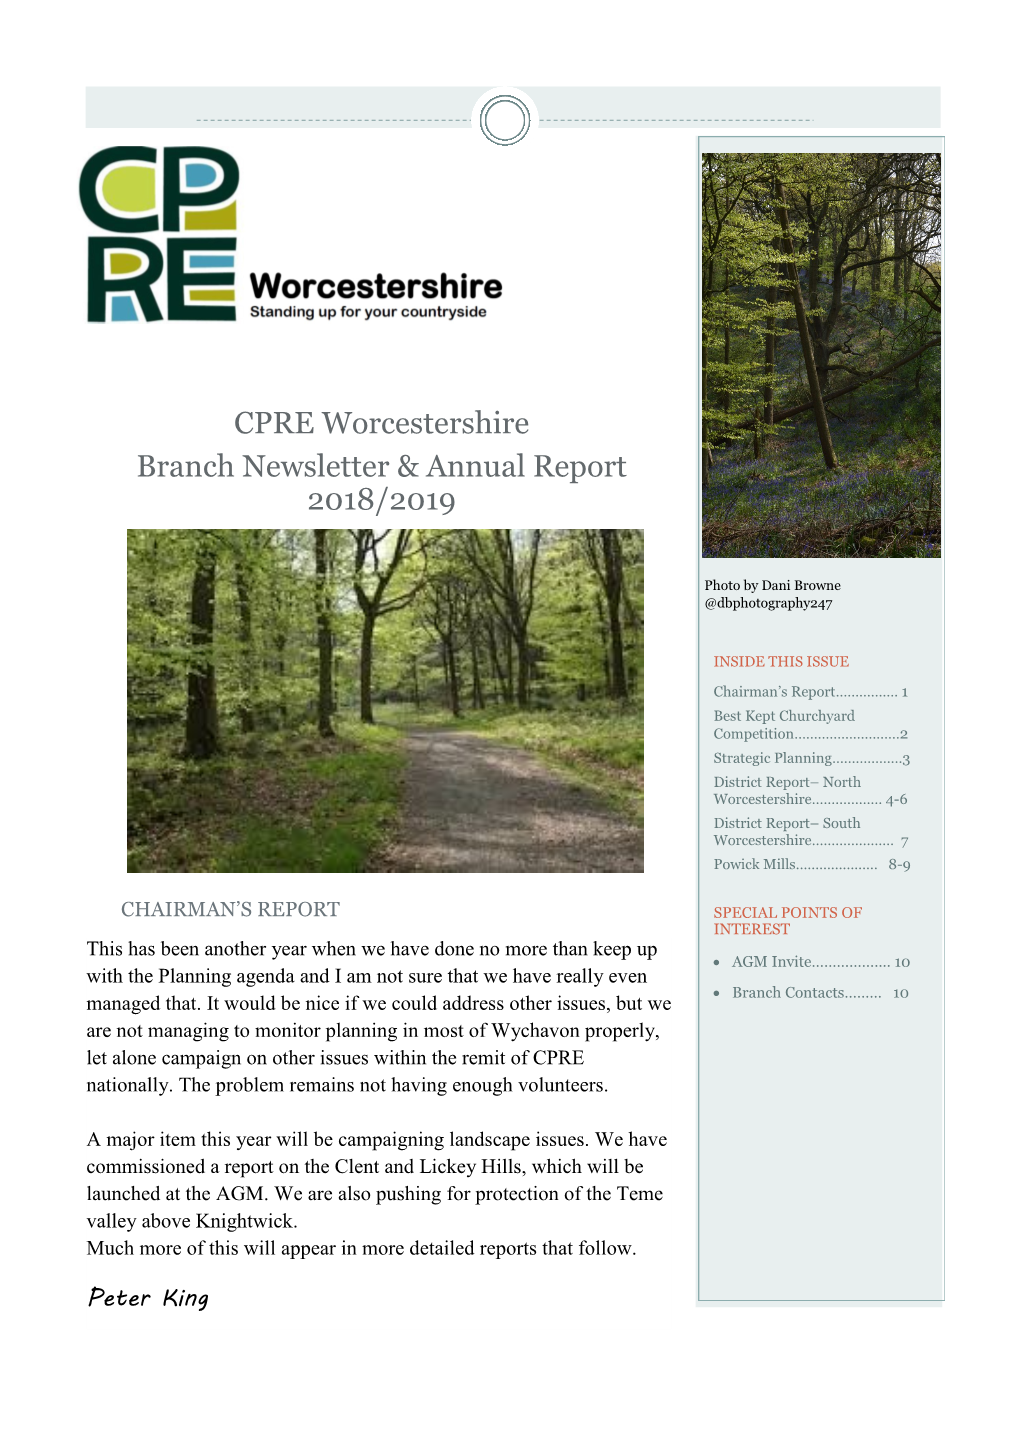 CPRE Worcestershire Branch Newsletter & Annual Report 2018